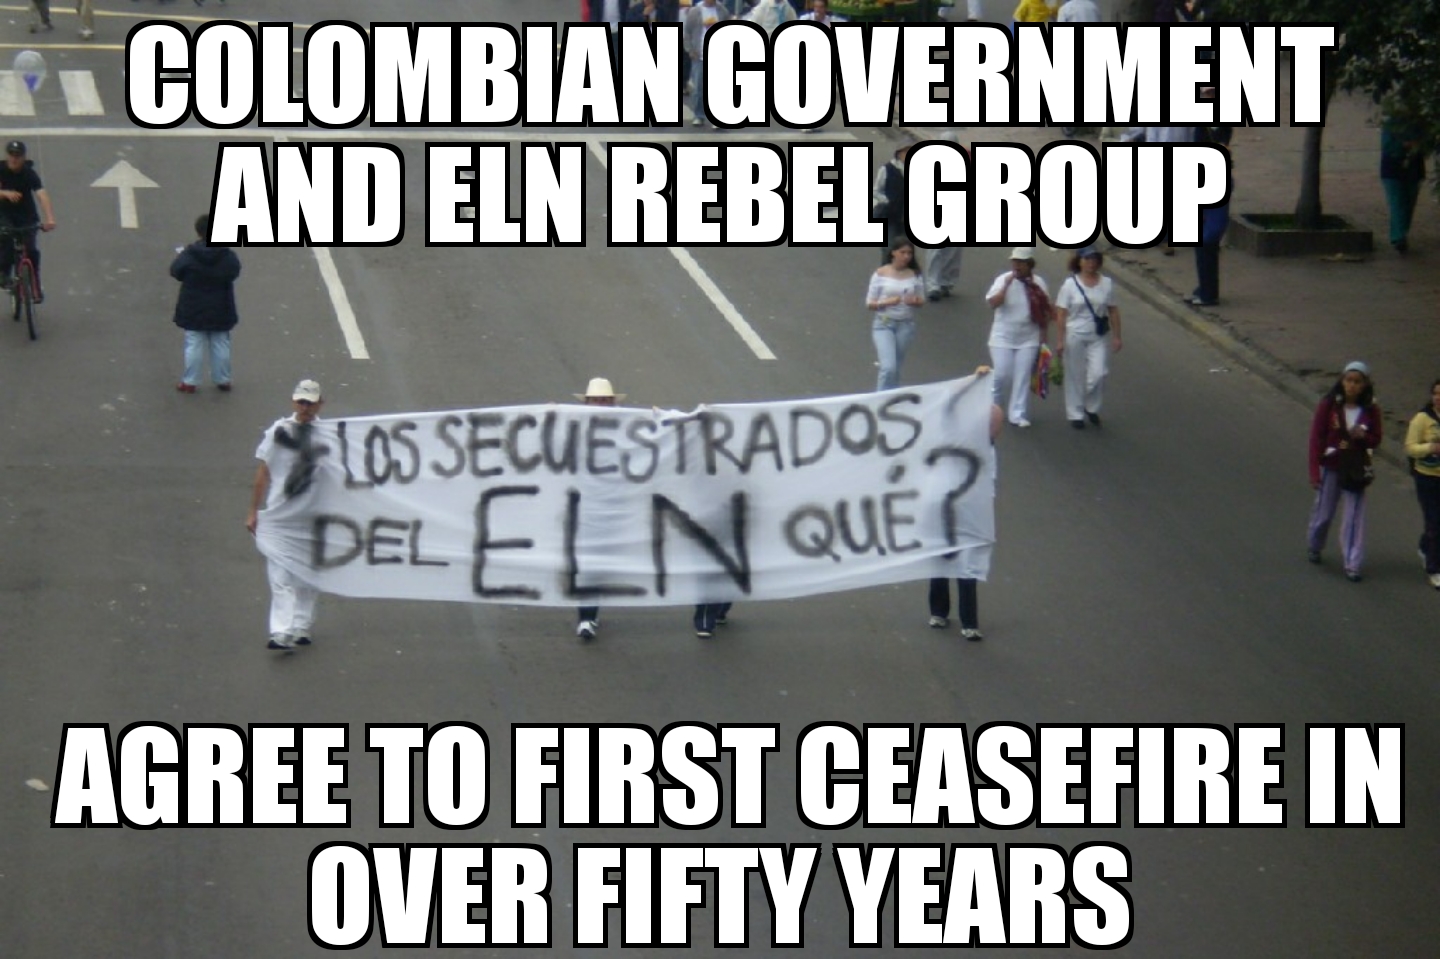 Colombia, ELN agree to ceasefire